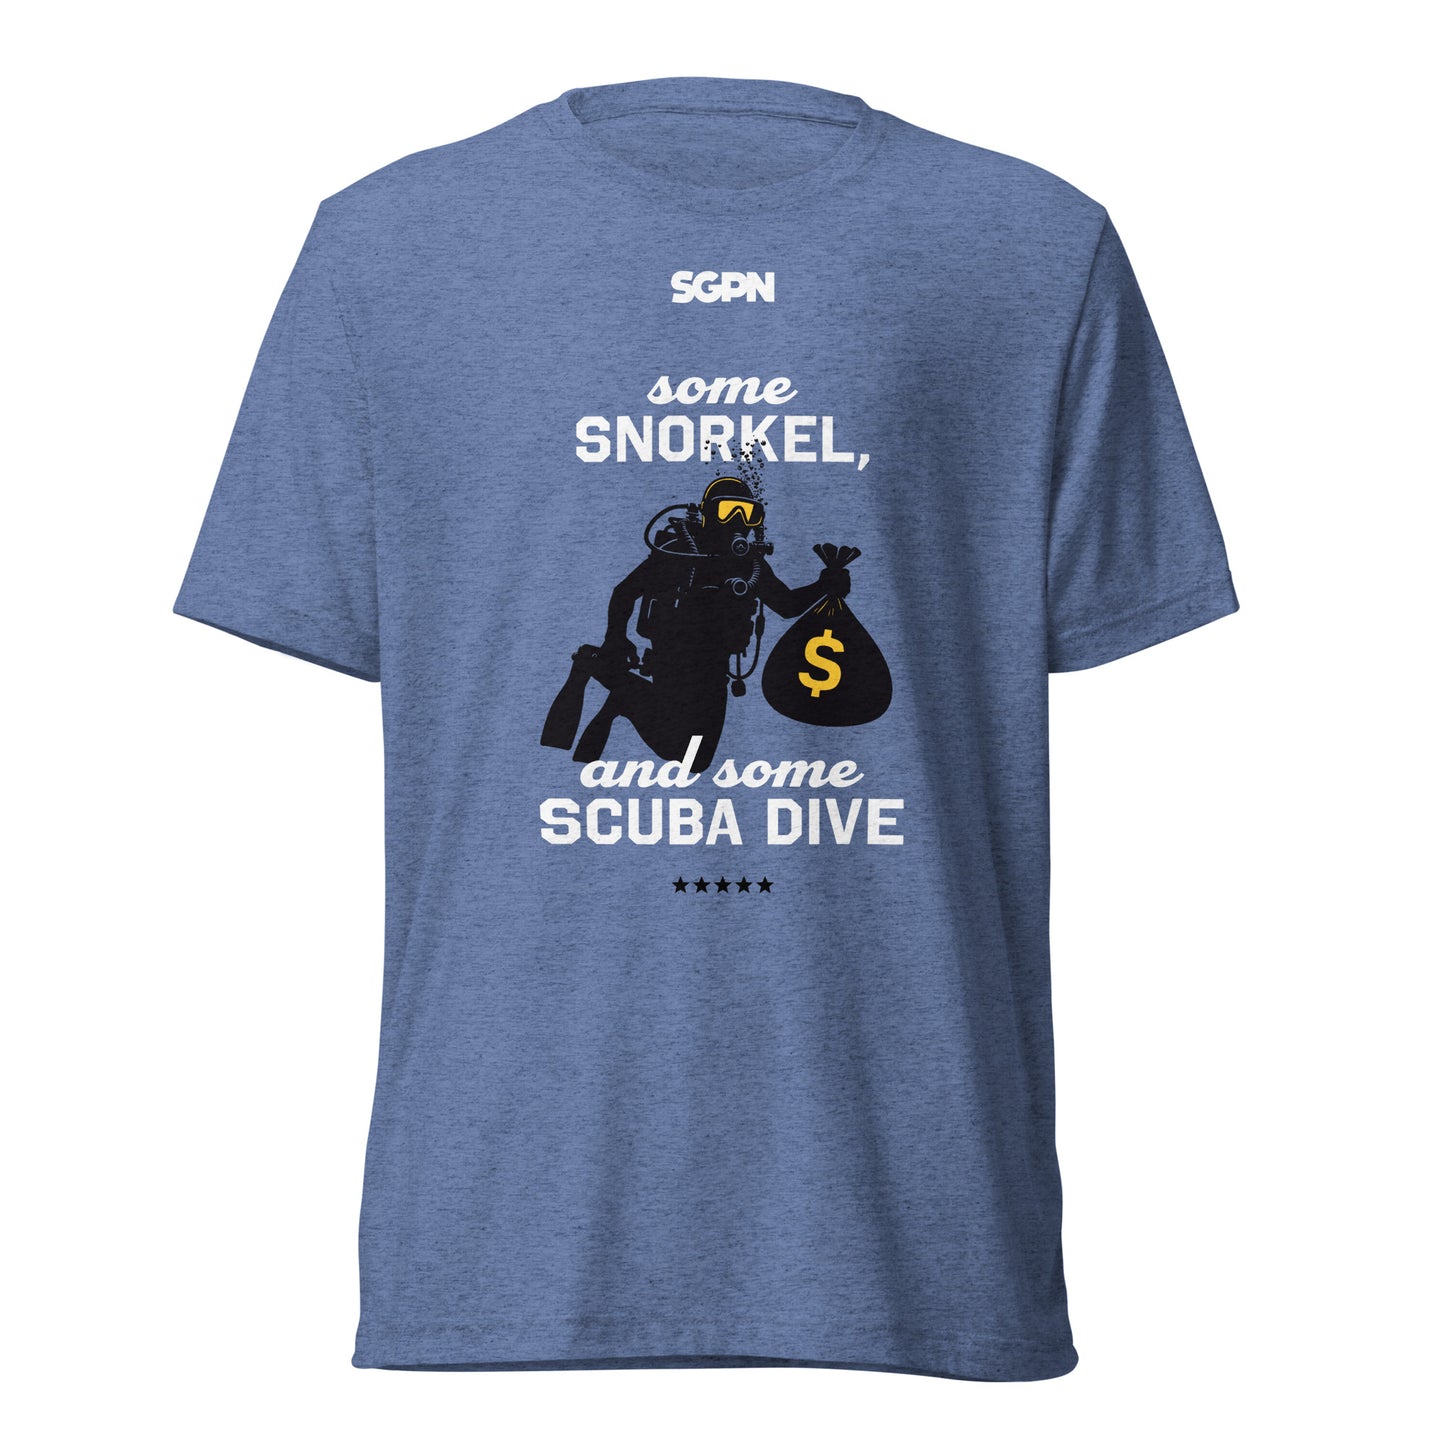 Some Snorkel, And Some Scuba Dive - Short sleeve t-shirt